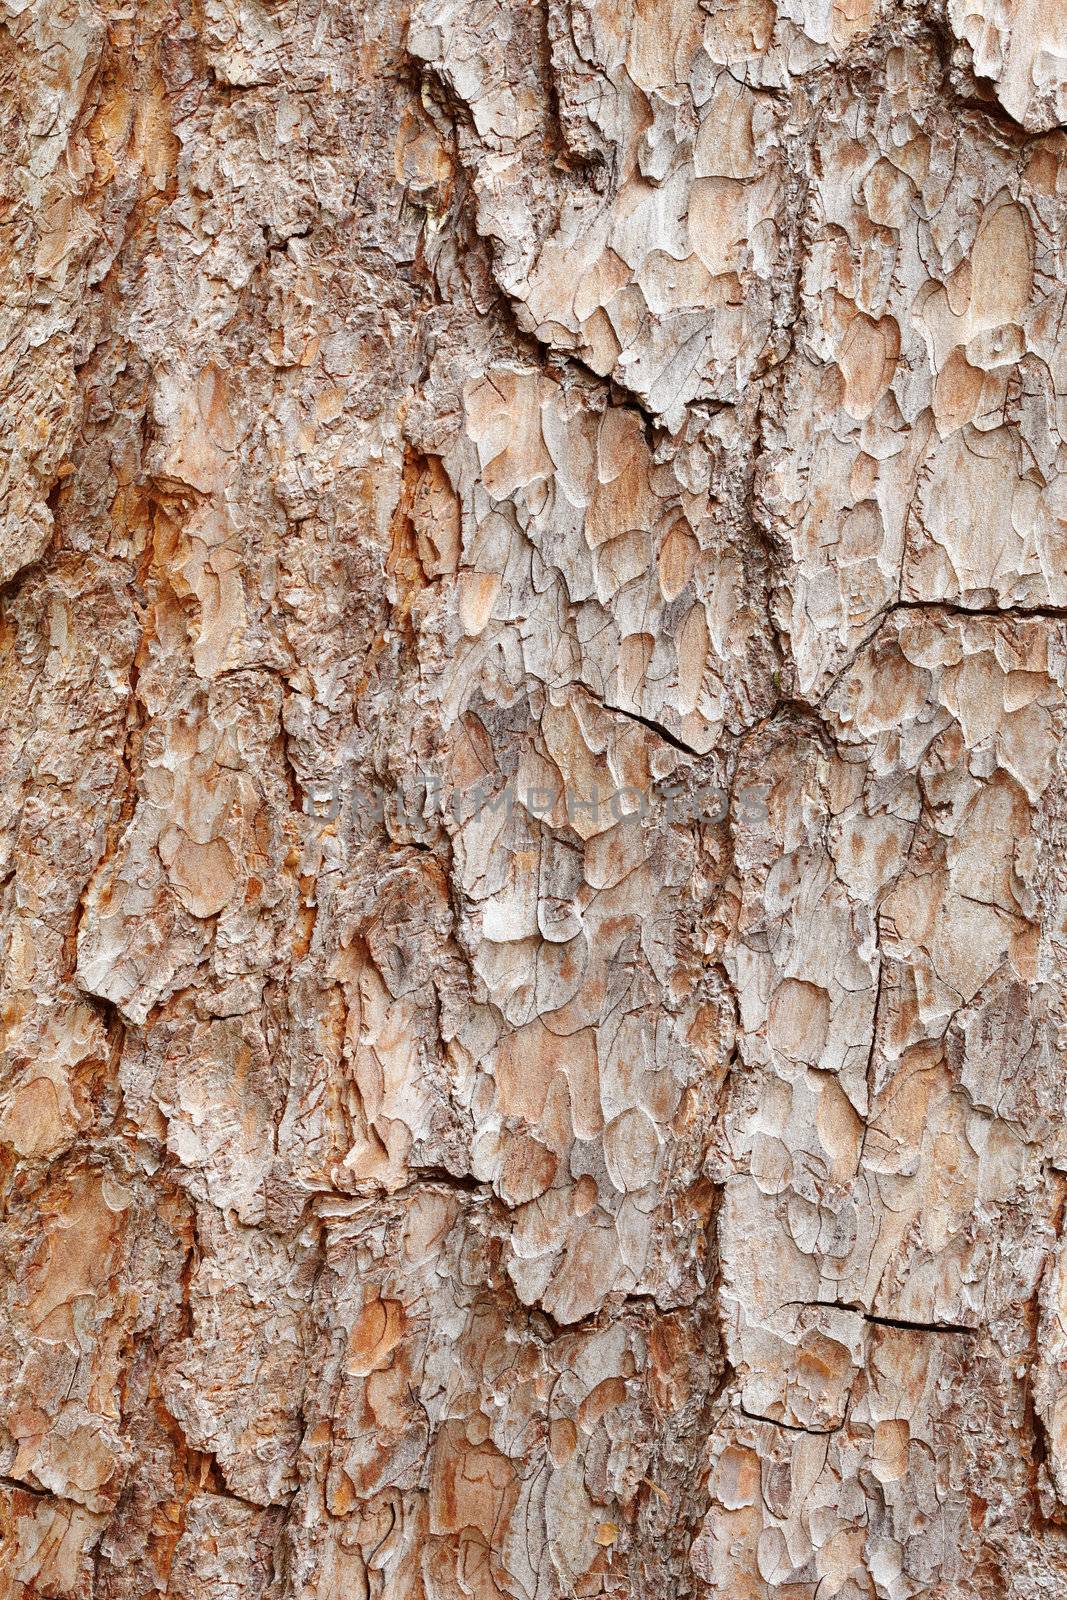 Bark of pine tree - texture by pzaxe